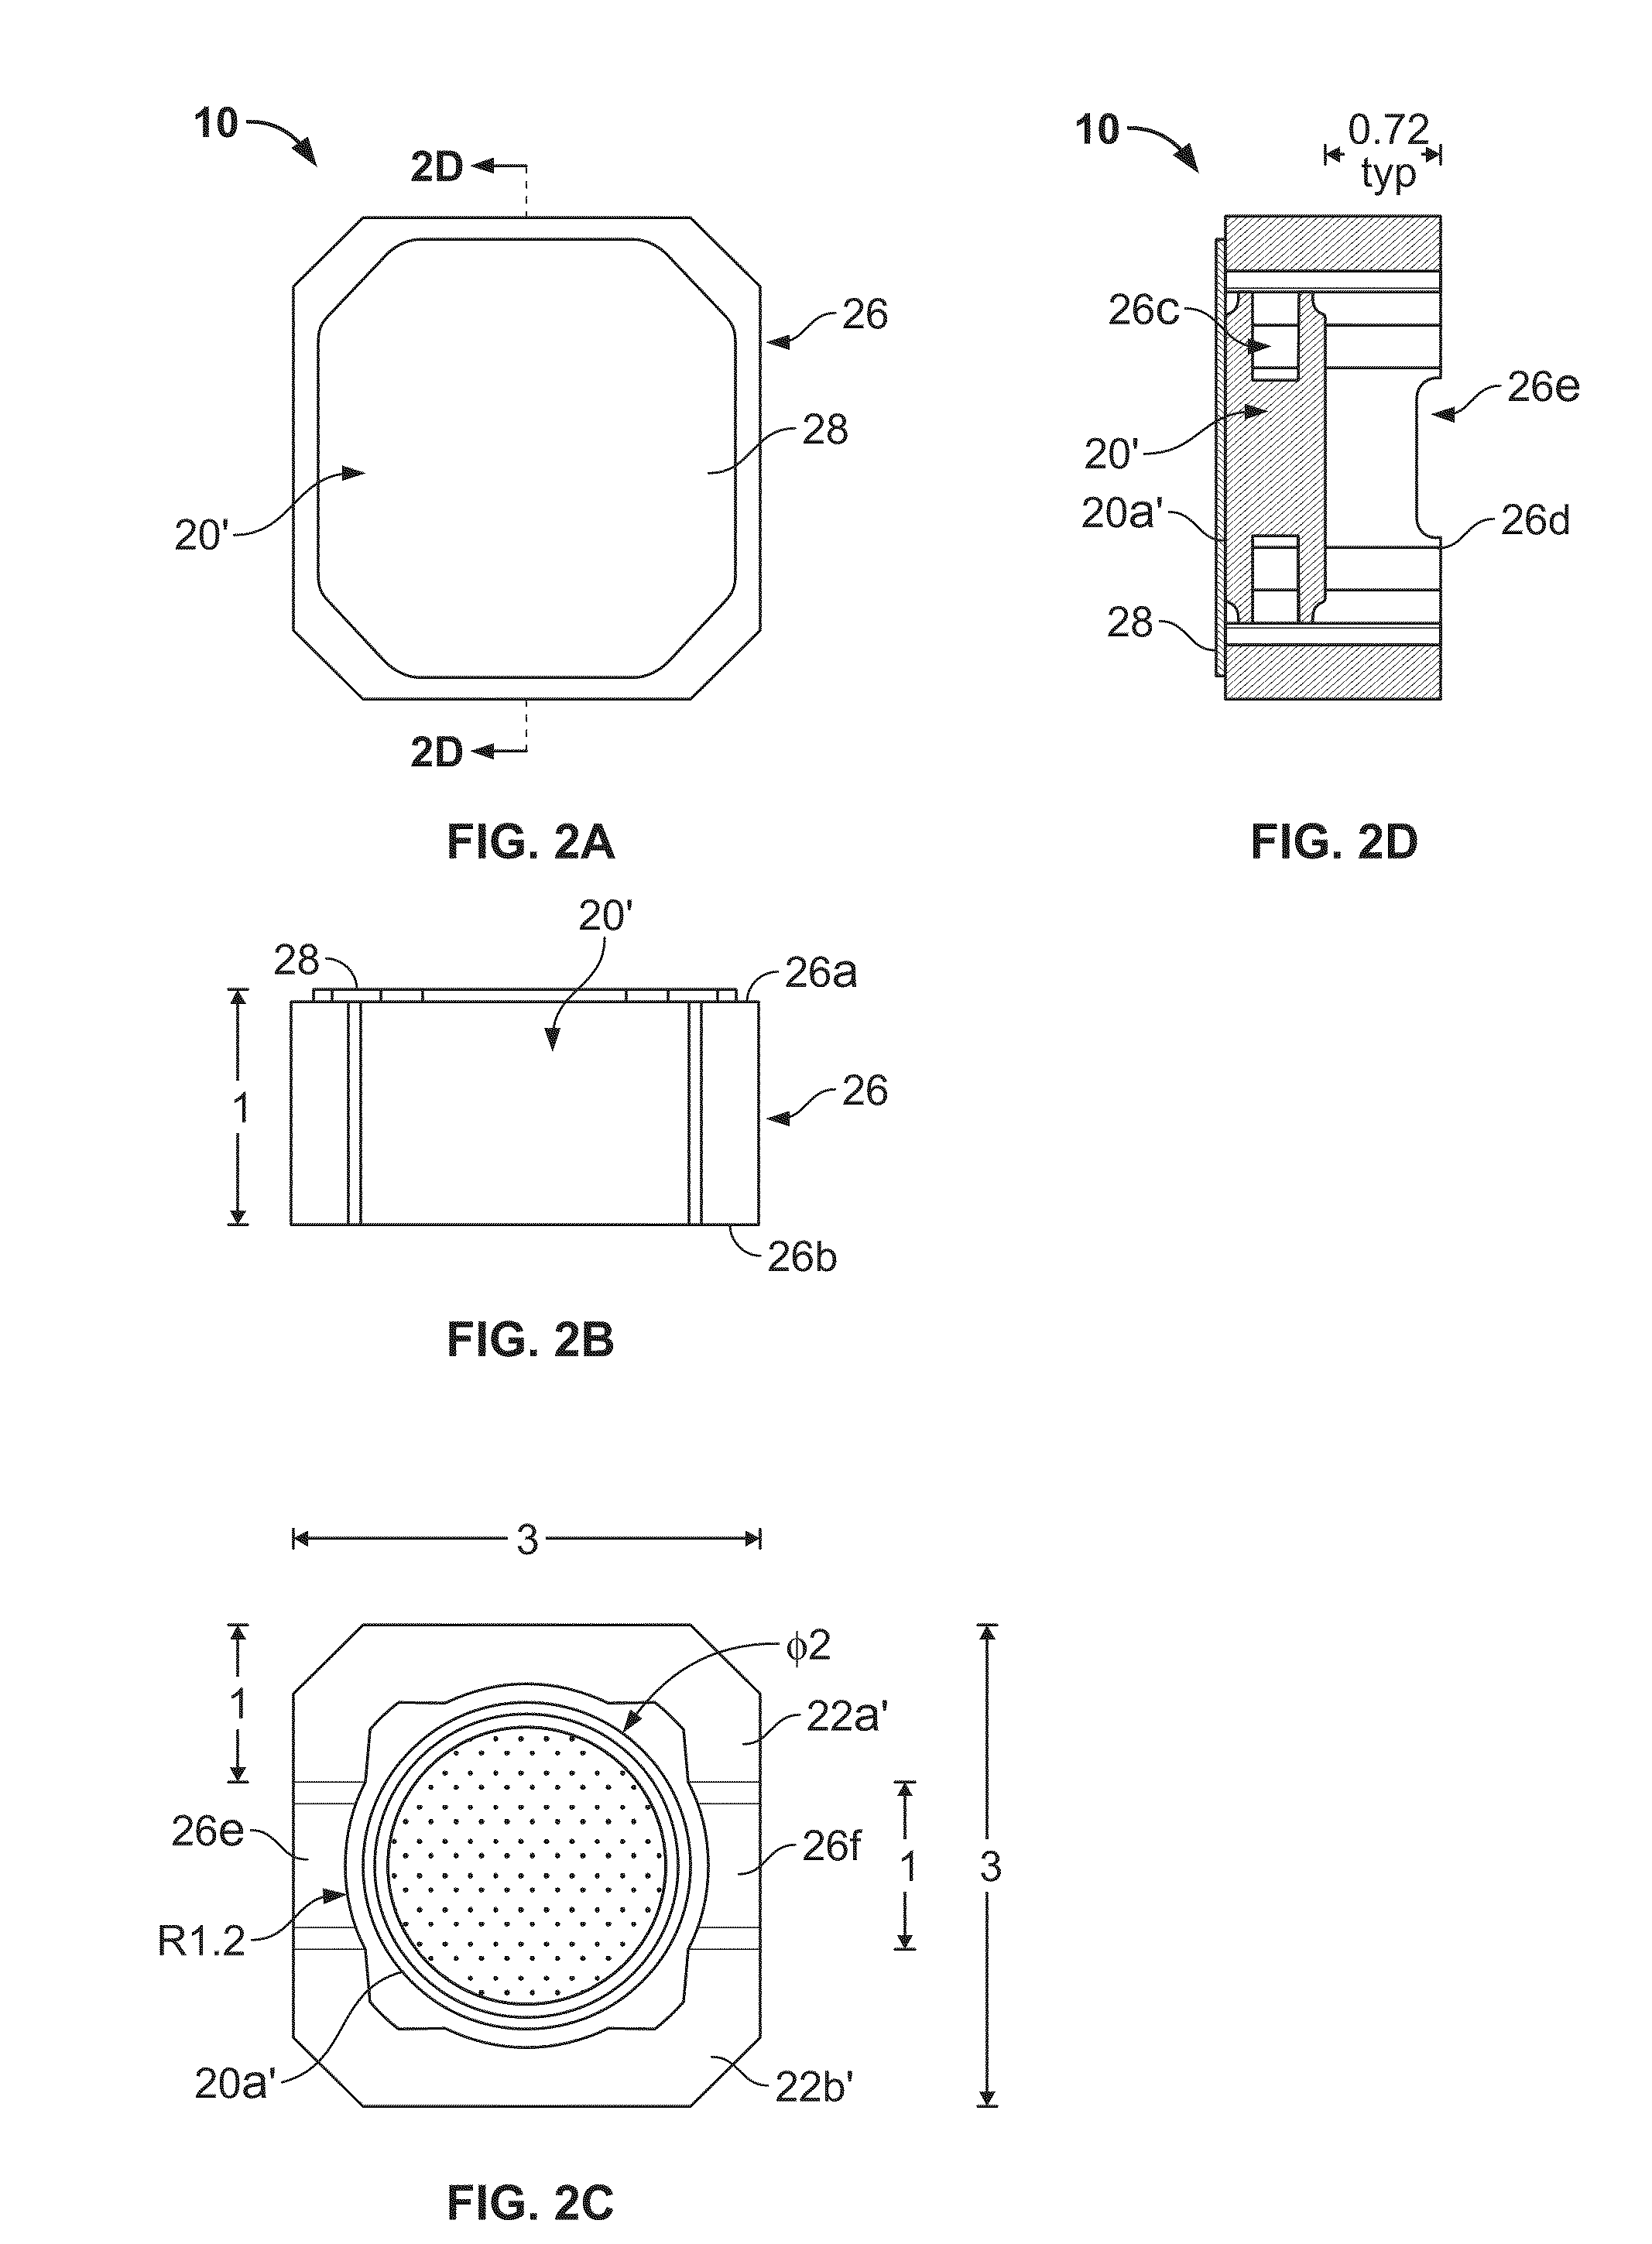 Method for conserving space in a circuit